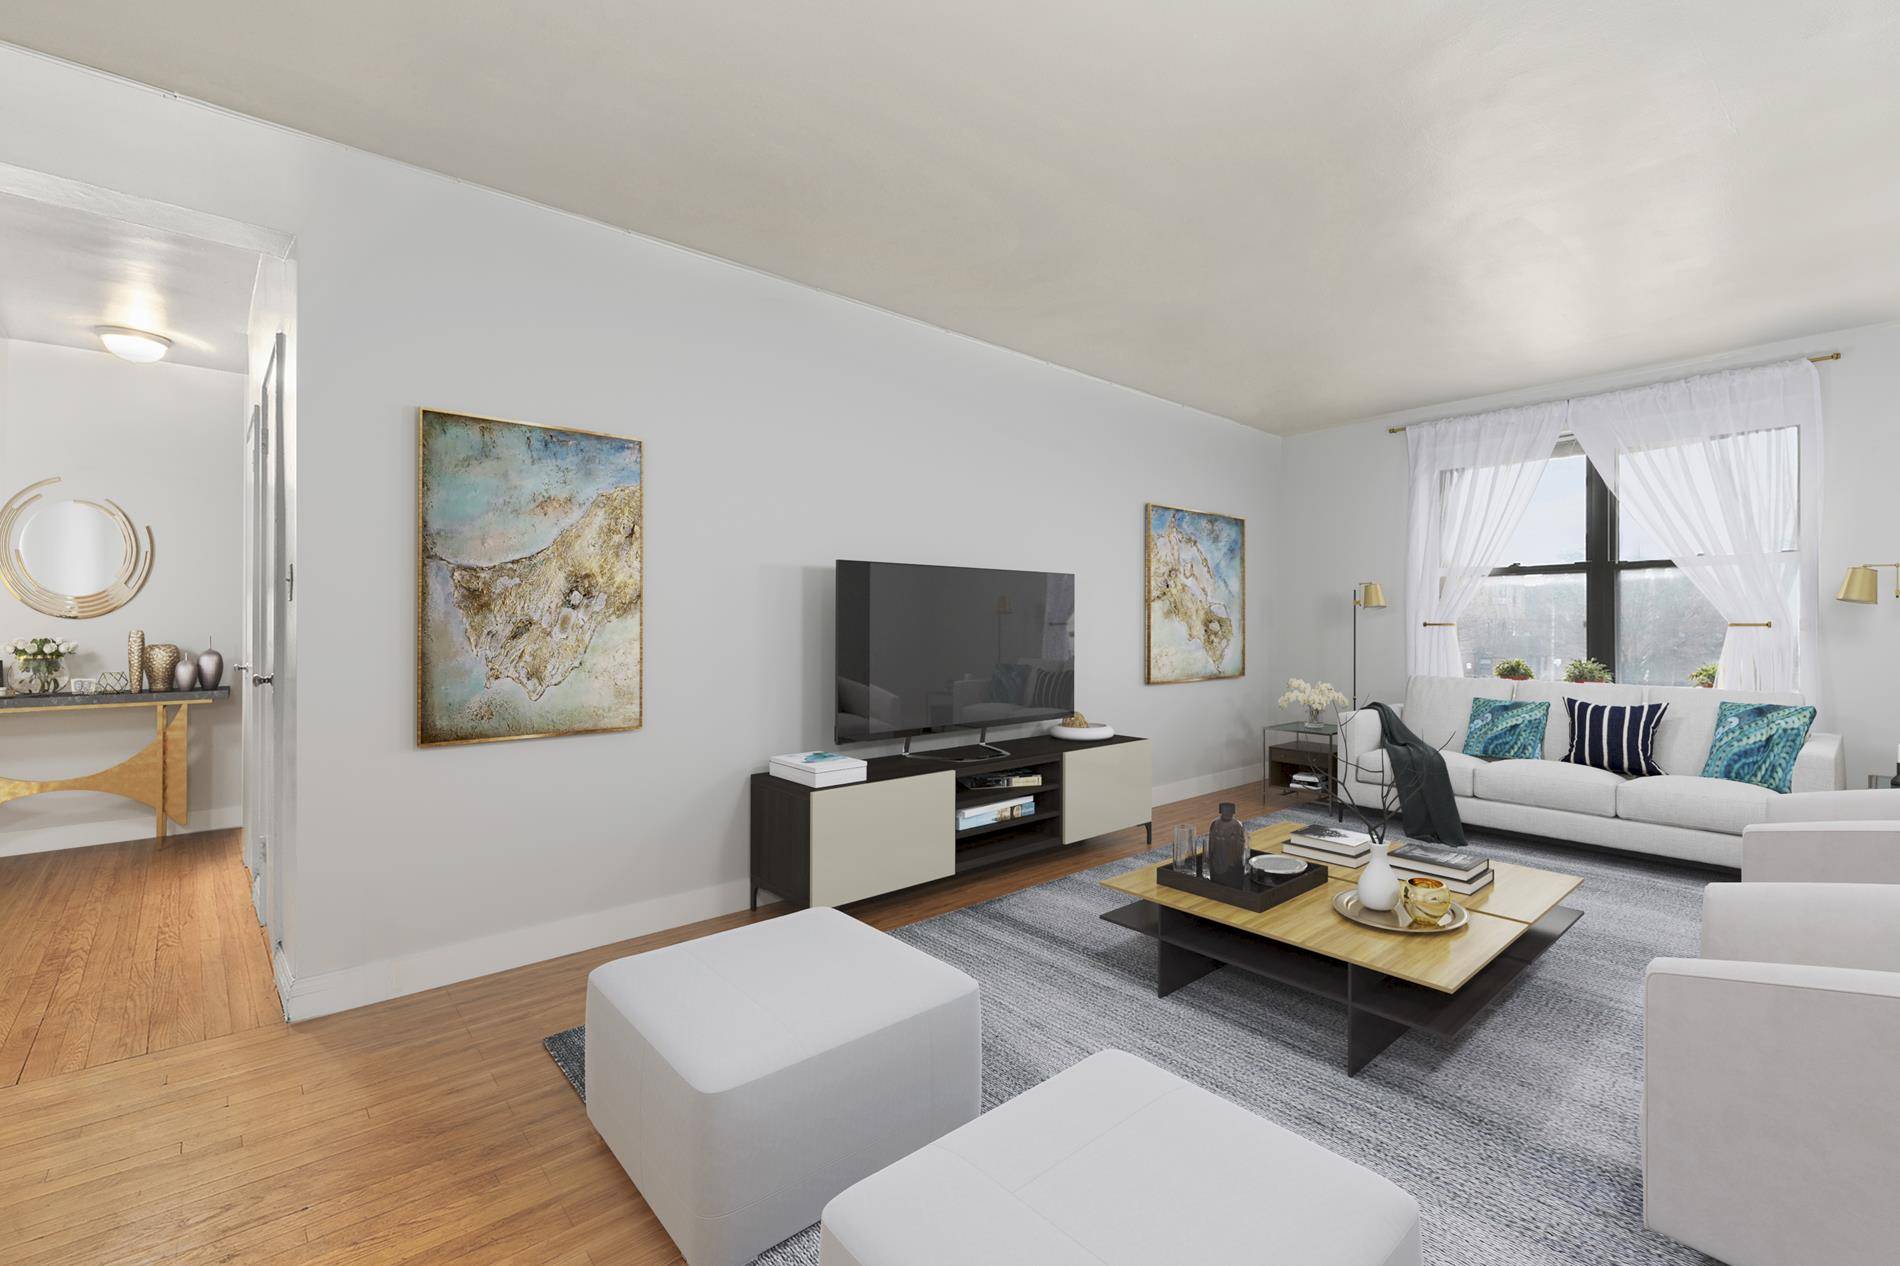 Deal Fell through ! You have an incredible chance to make this bright, spacious second floor 1 bedroom condo located in the quiet neighborhood of Astoria Heights yours.